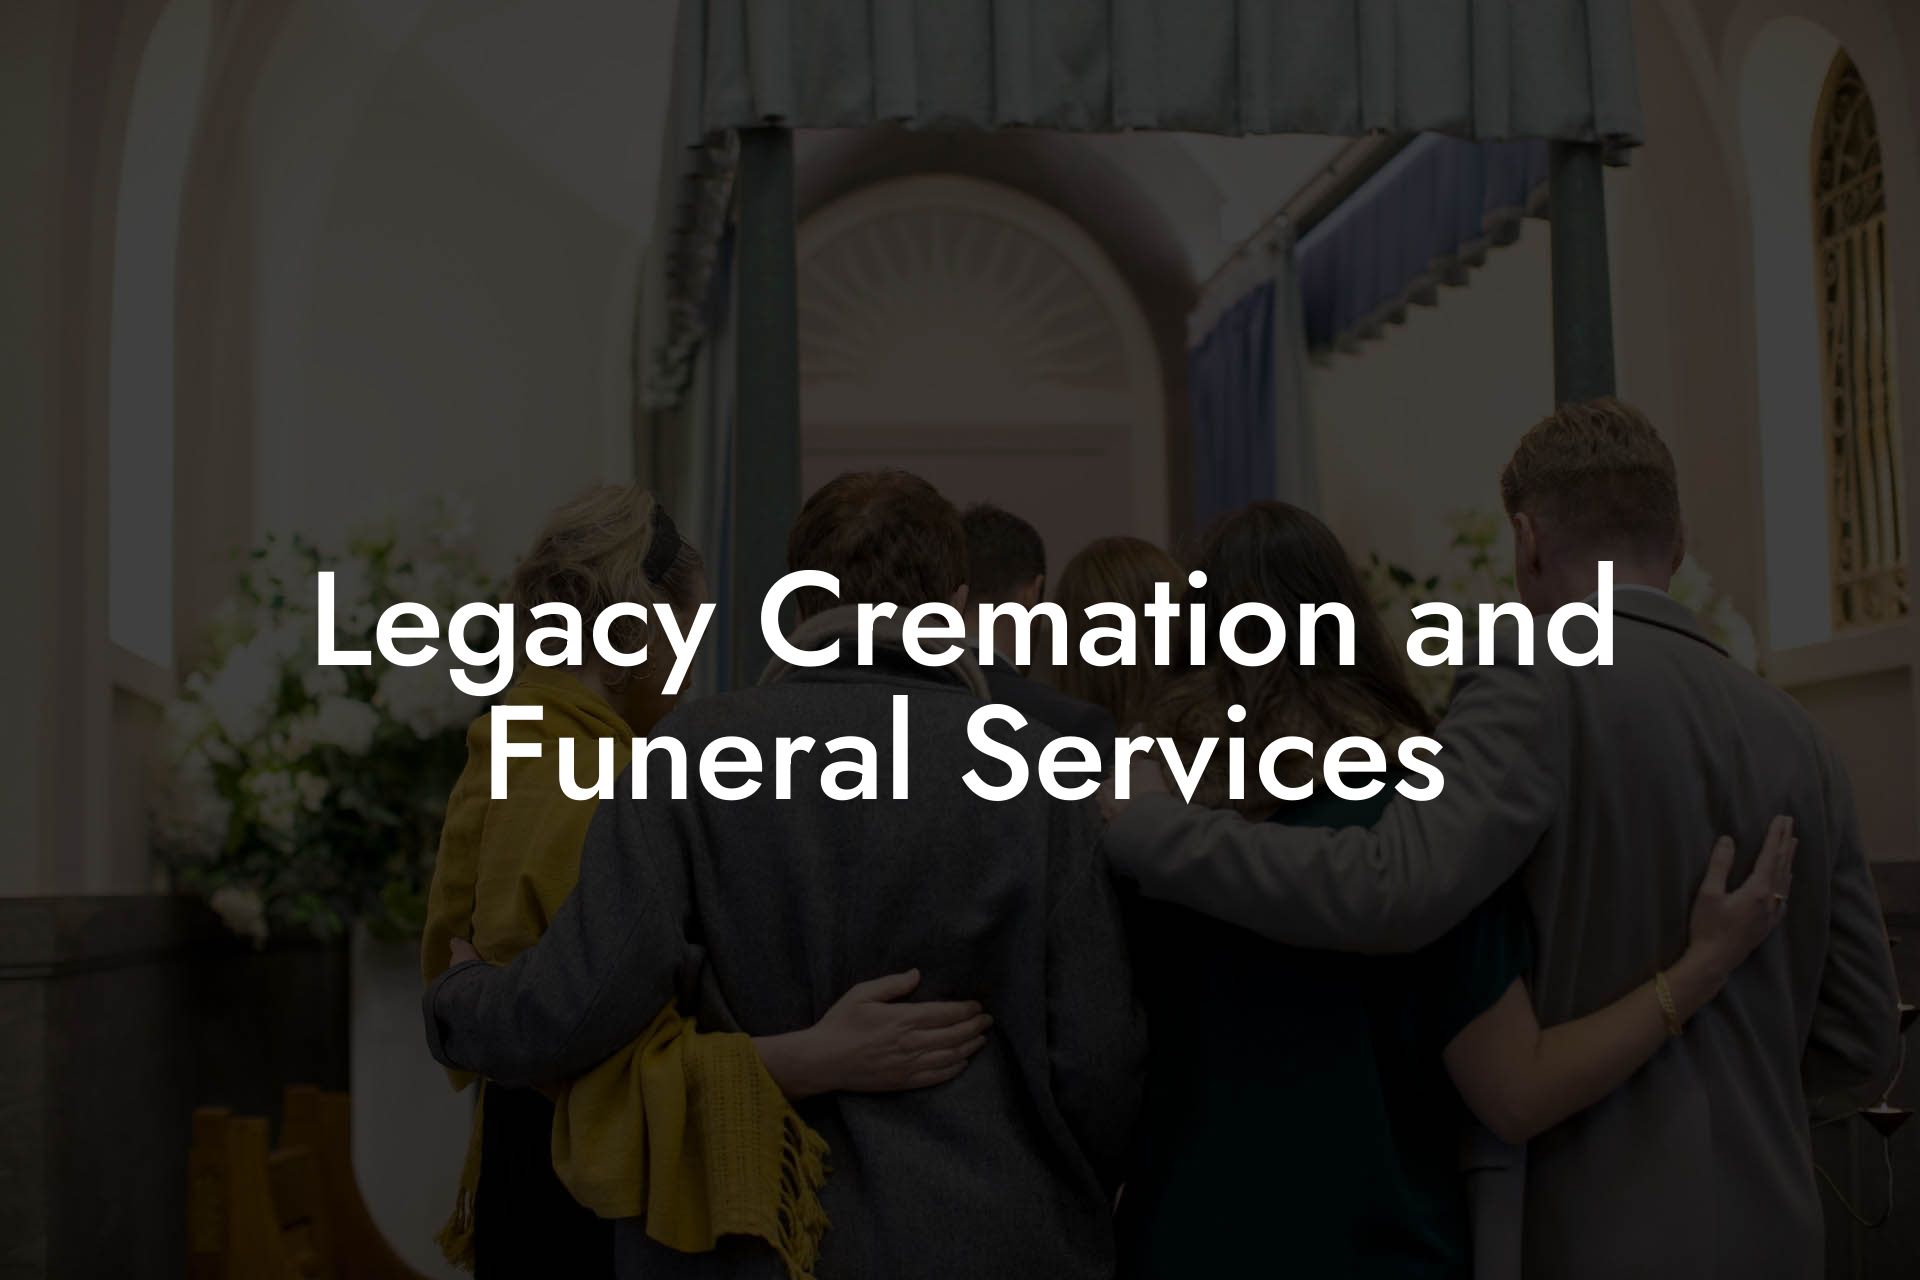 Legacy Cremation and Funeral Services